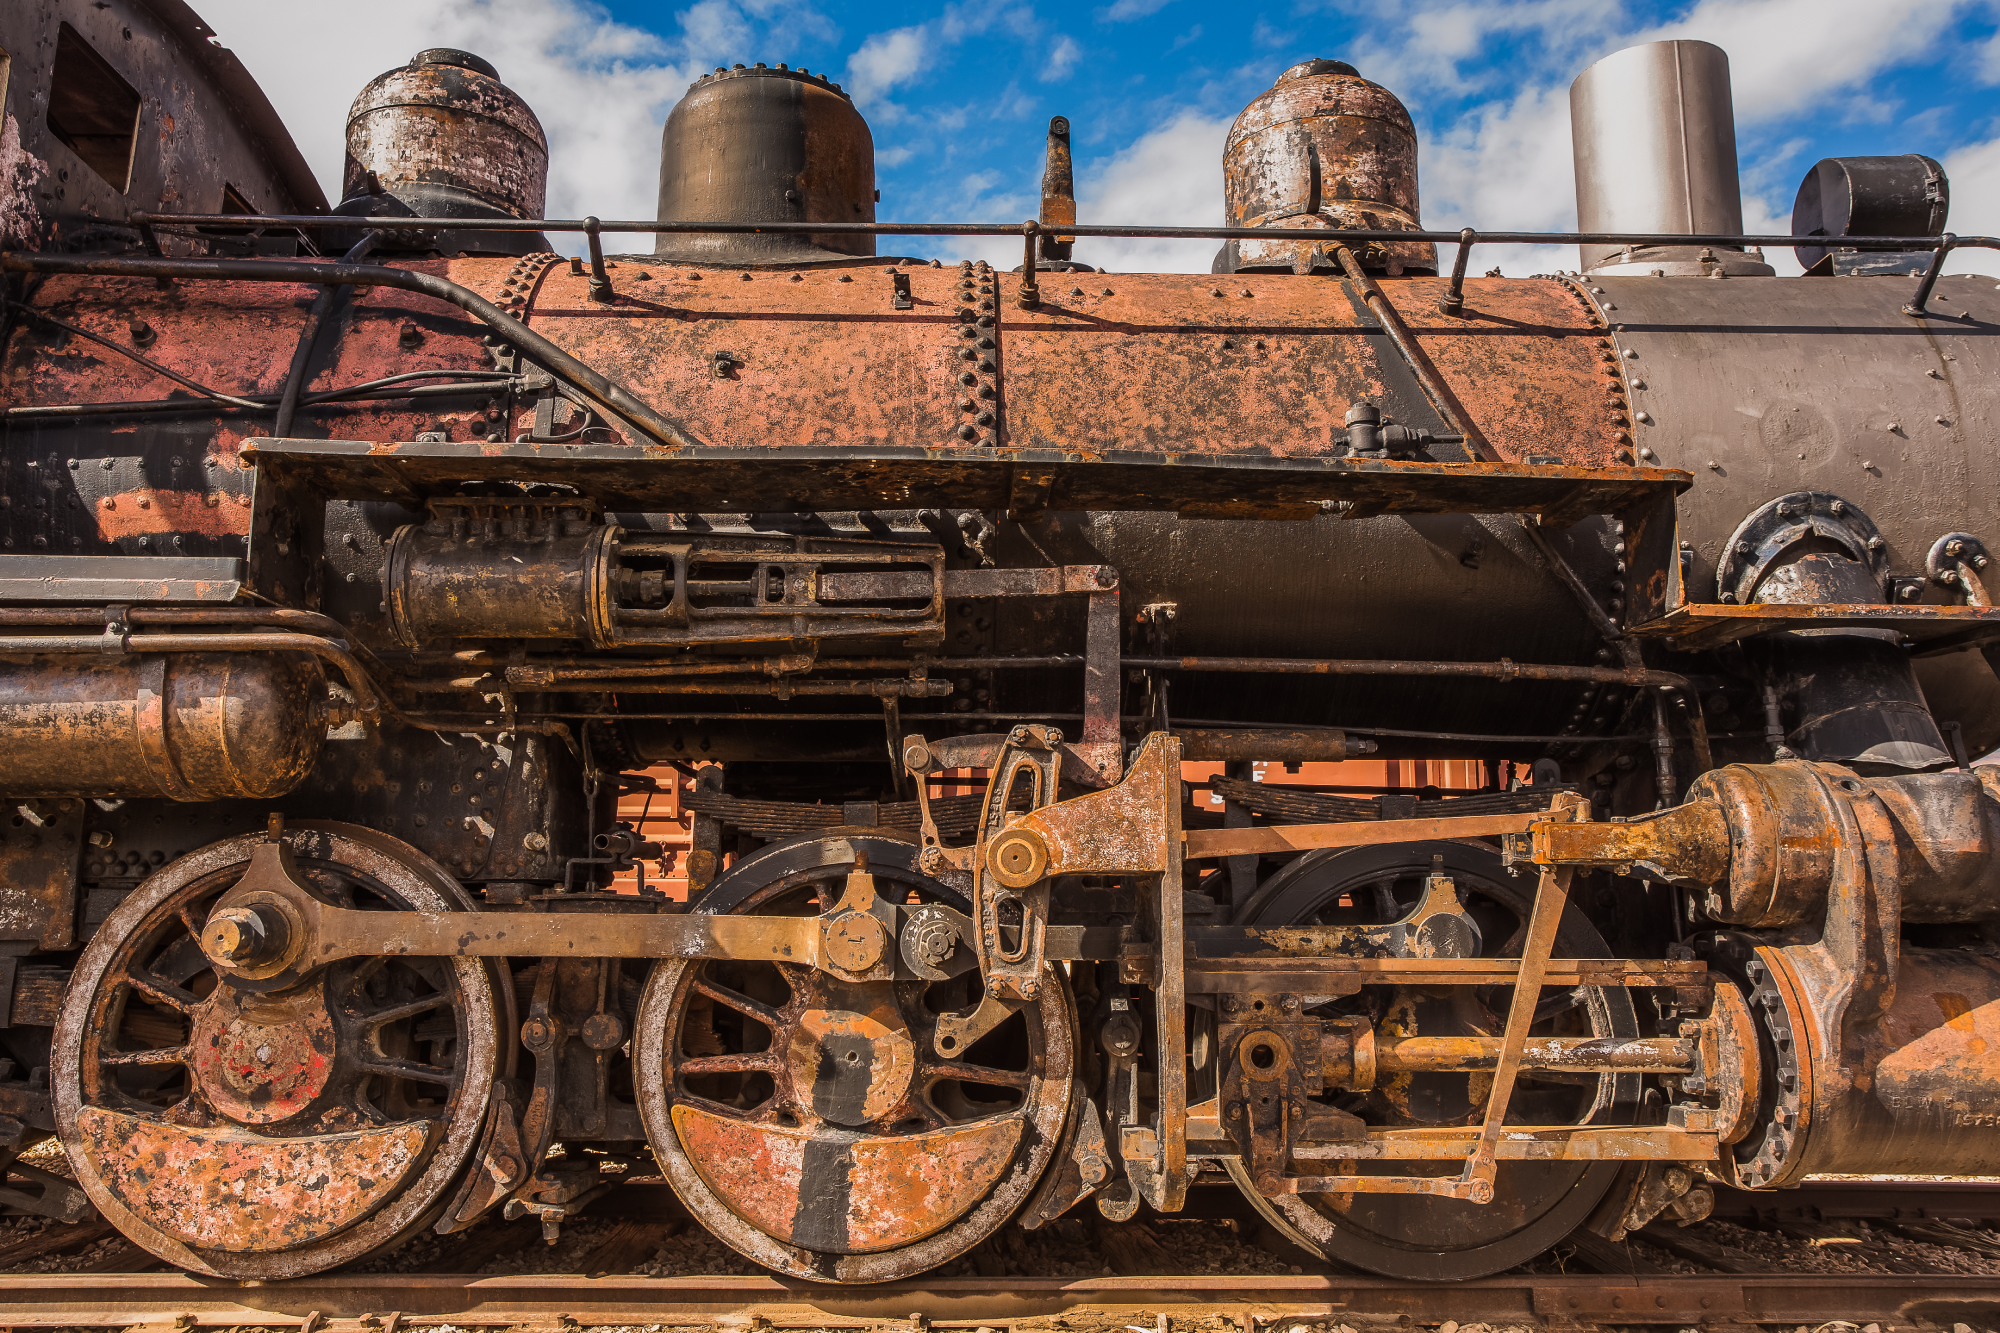 HDR Photography Workshop: Heber Creeper Train HDR | Pt.2 | RAW Preparation and HDR Export